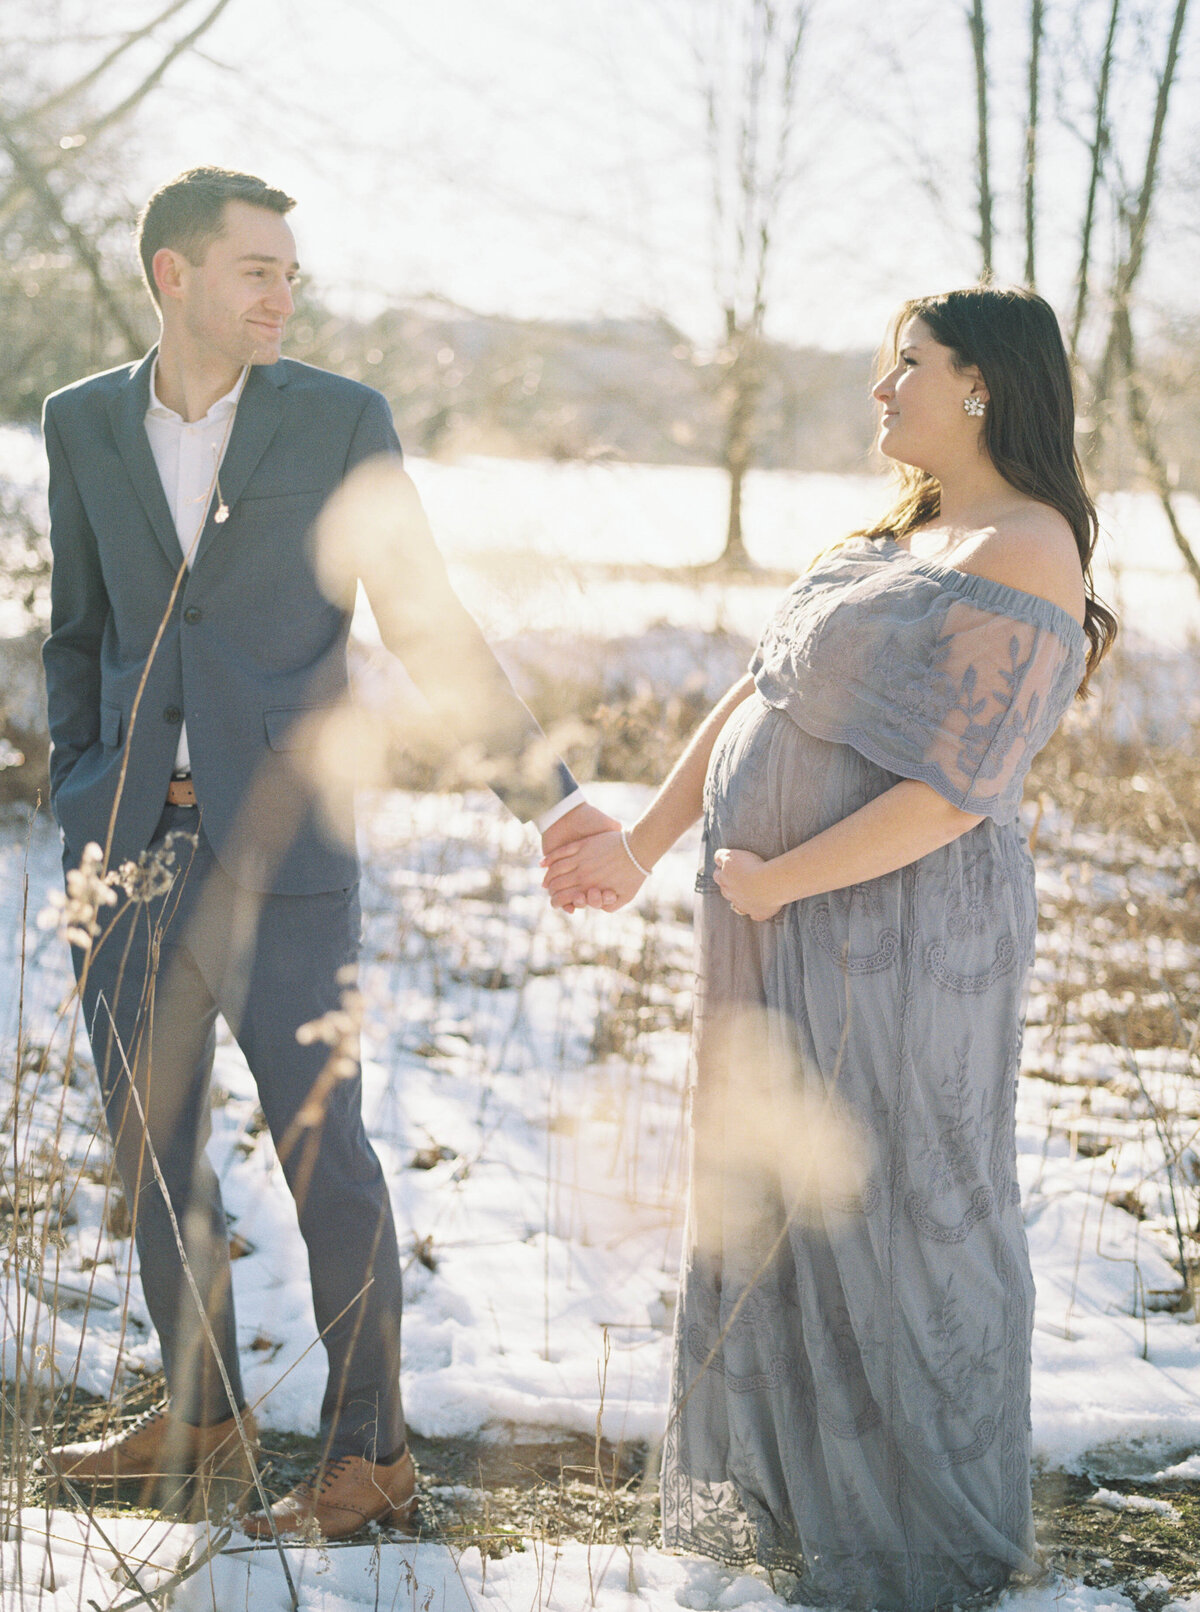 penfield, ny maternity session film photographer